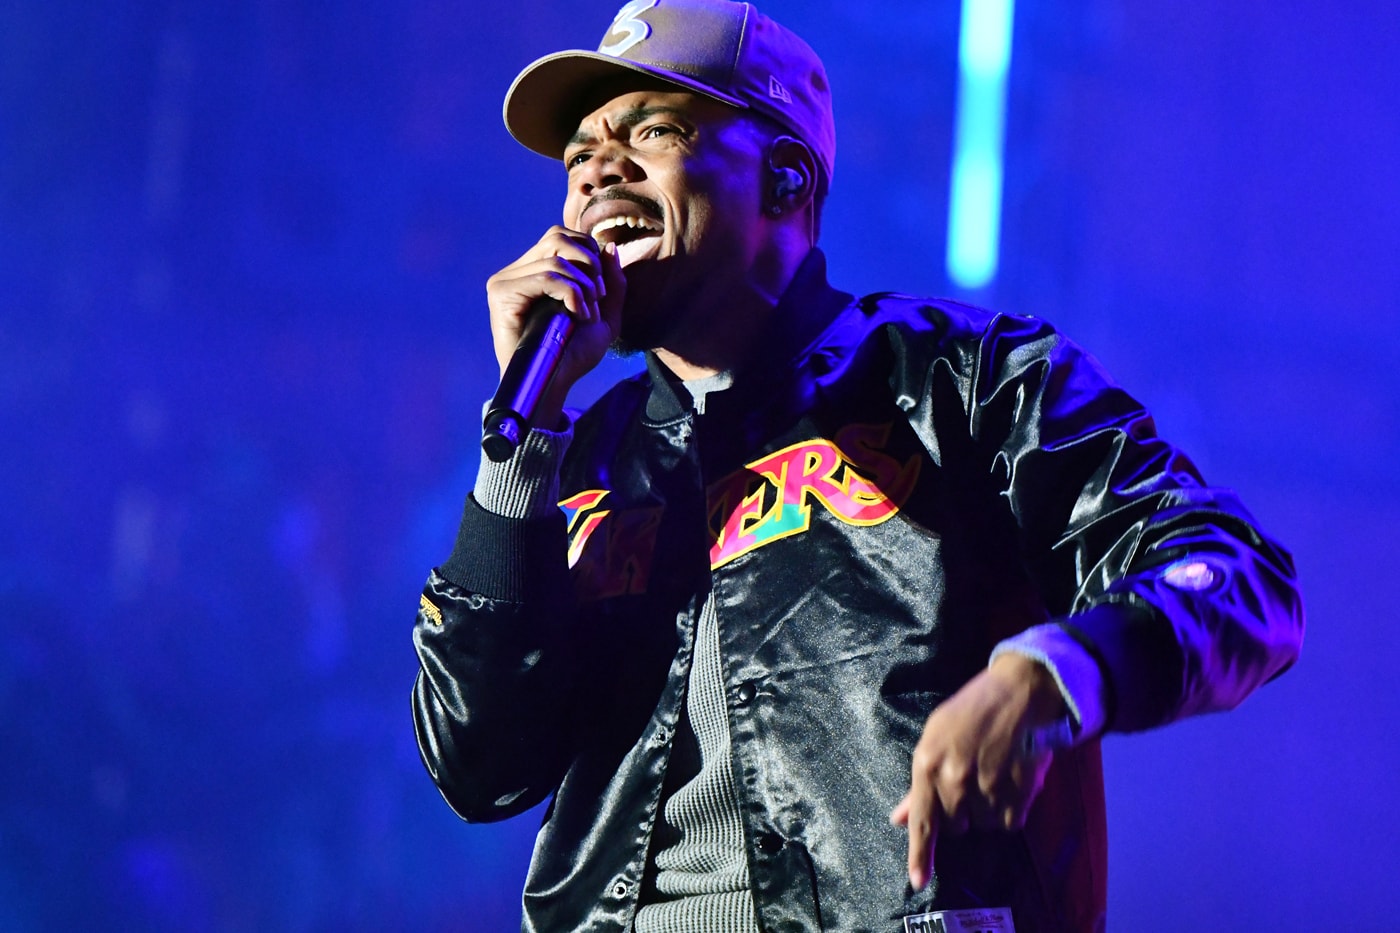 chance-the-rapper-chance-3-release-date